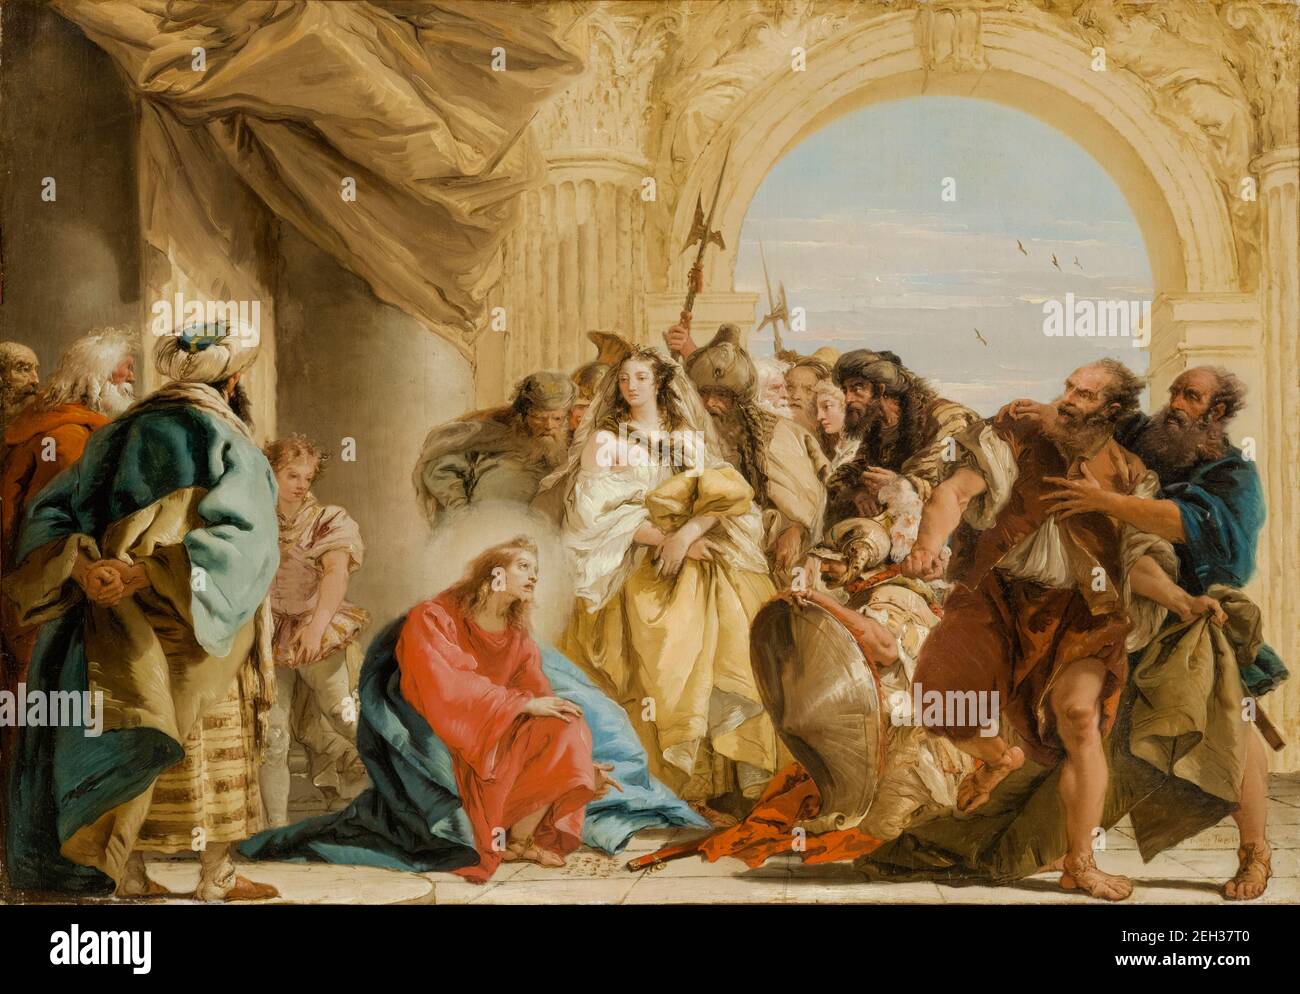 Christ and the Woman Taken in Adultery, painting by Giovanni Domenico Tiepolo after Giovanni Battista Tiepolo, 1752 Stock Photo